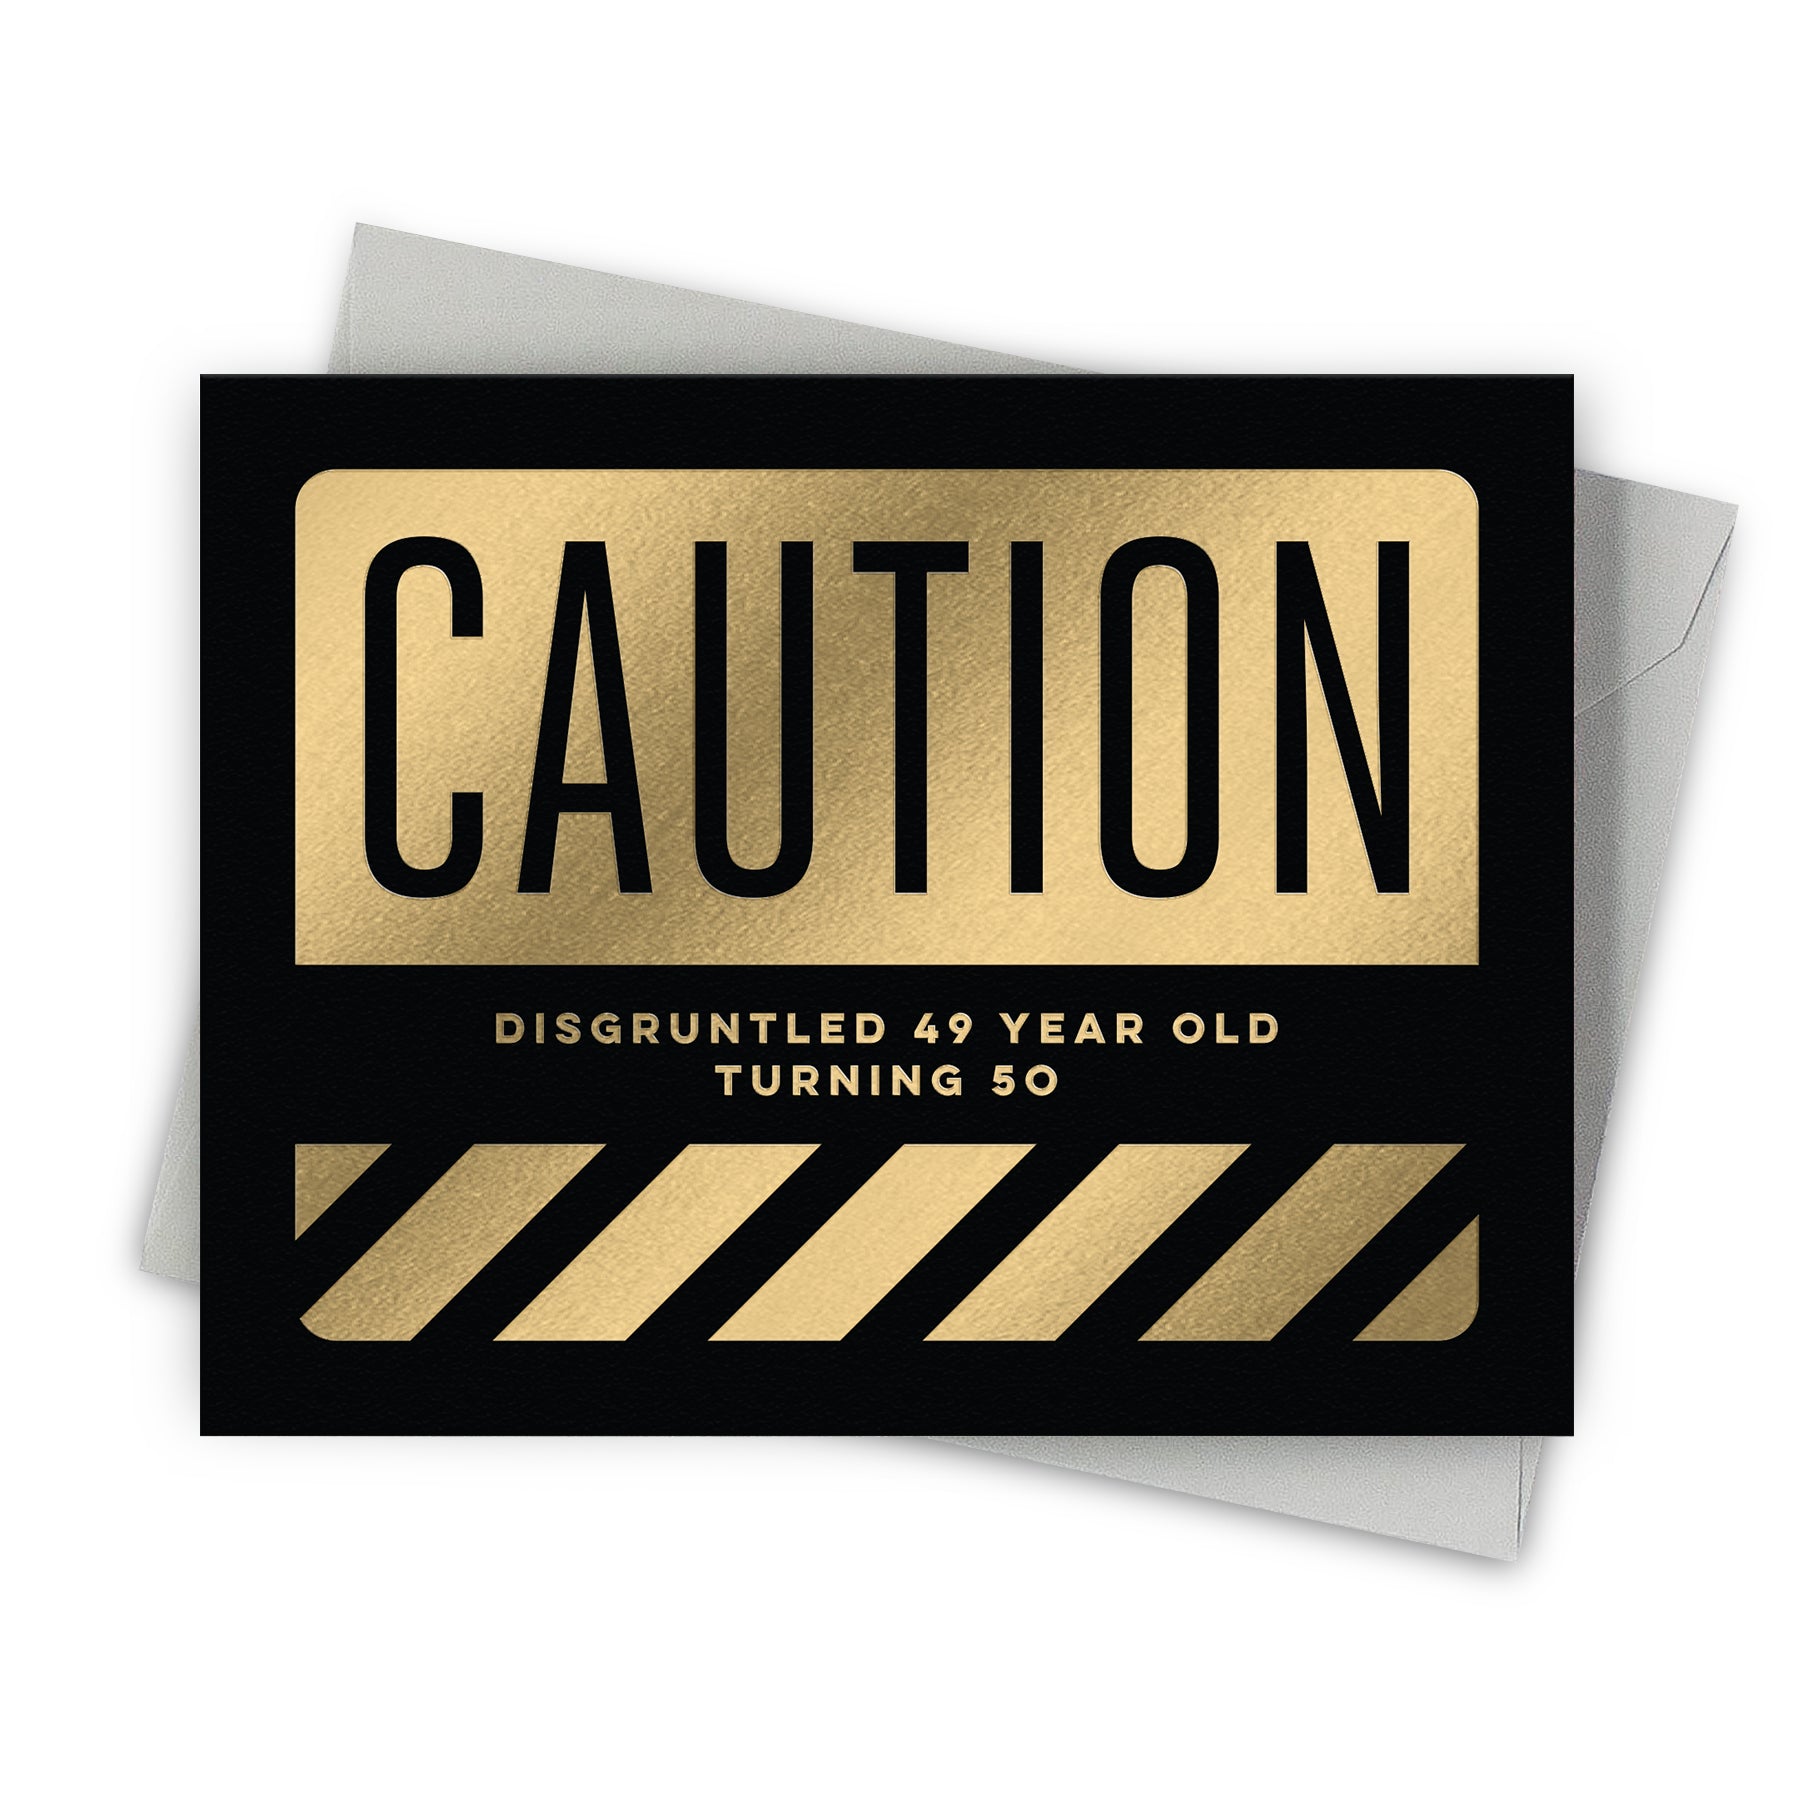 Caution Birthday Card and coordinating gray envelope by Fine Moments 